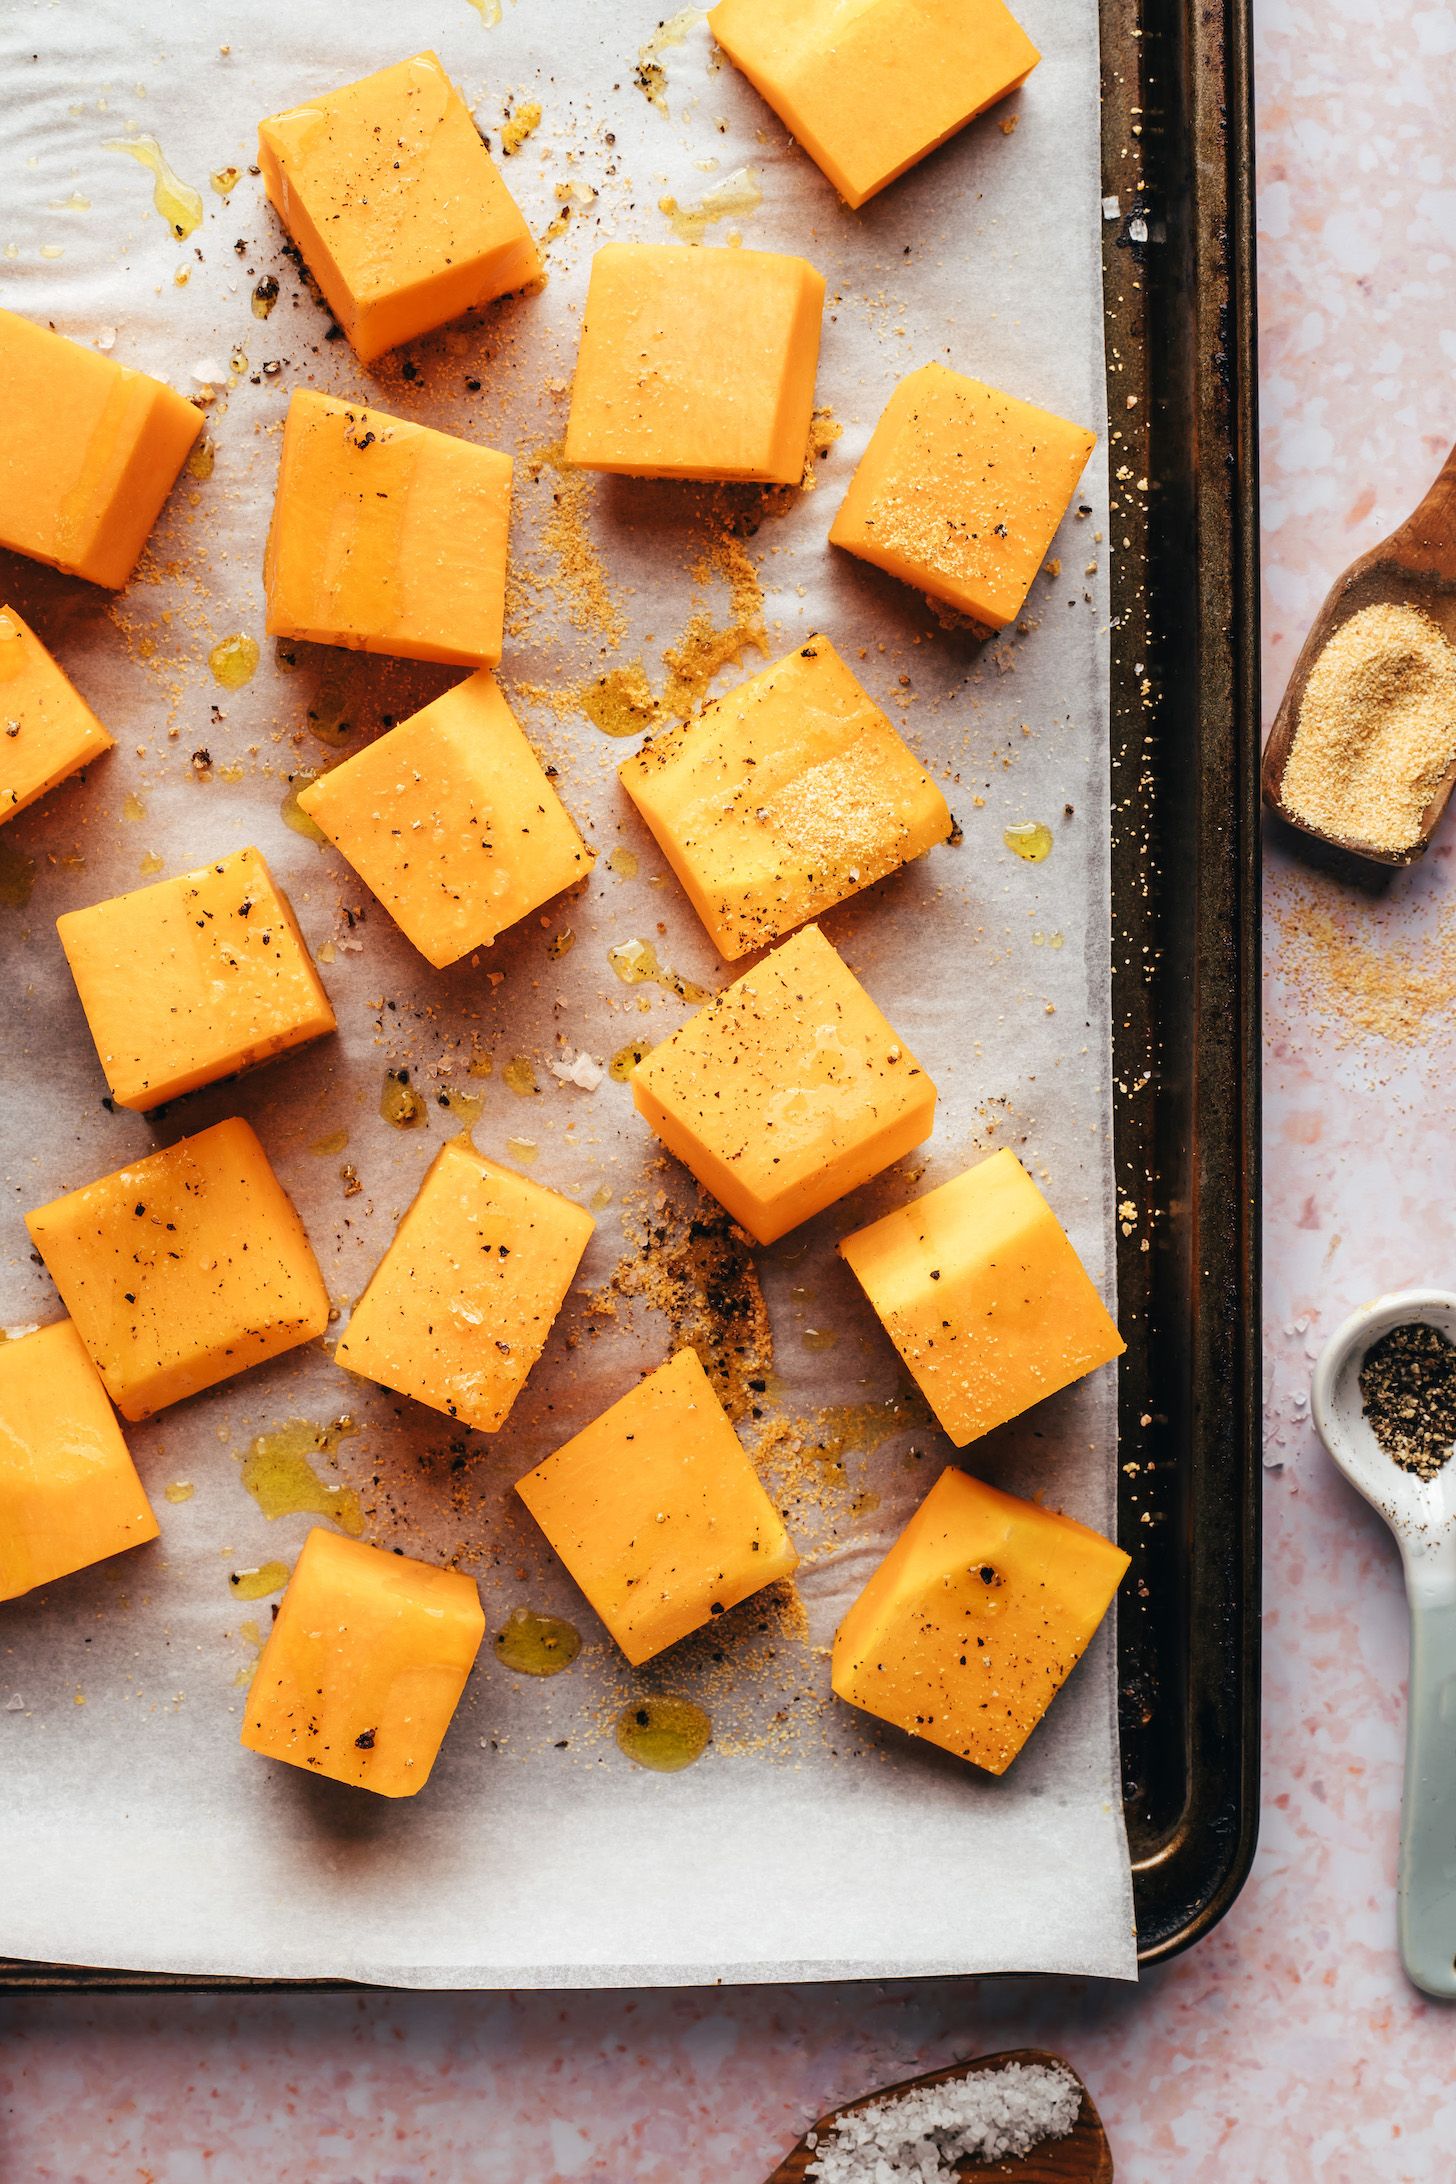 Cubed butternut squash on a baking sheet drizzled with oil and sprinkled with seasonings